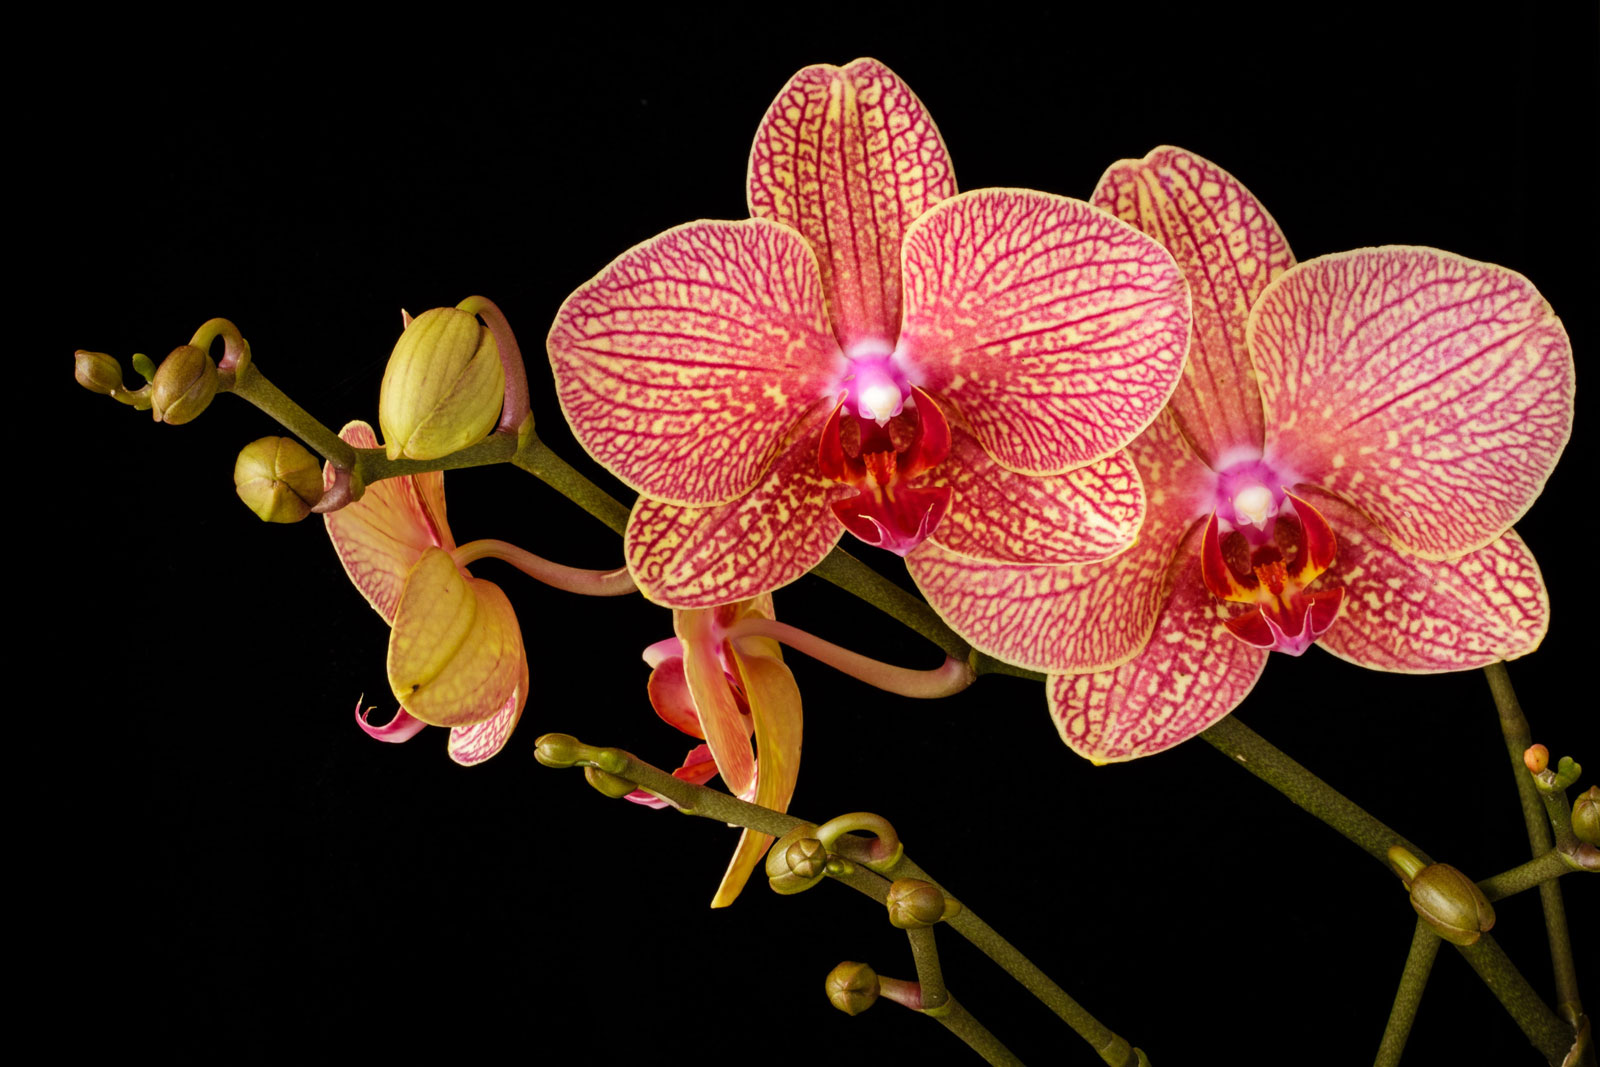 ORCHID